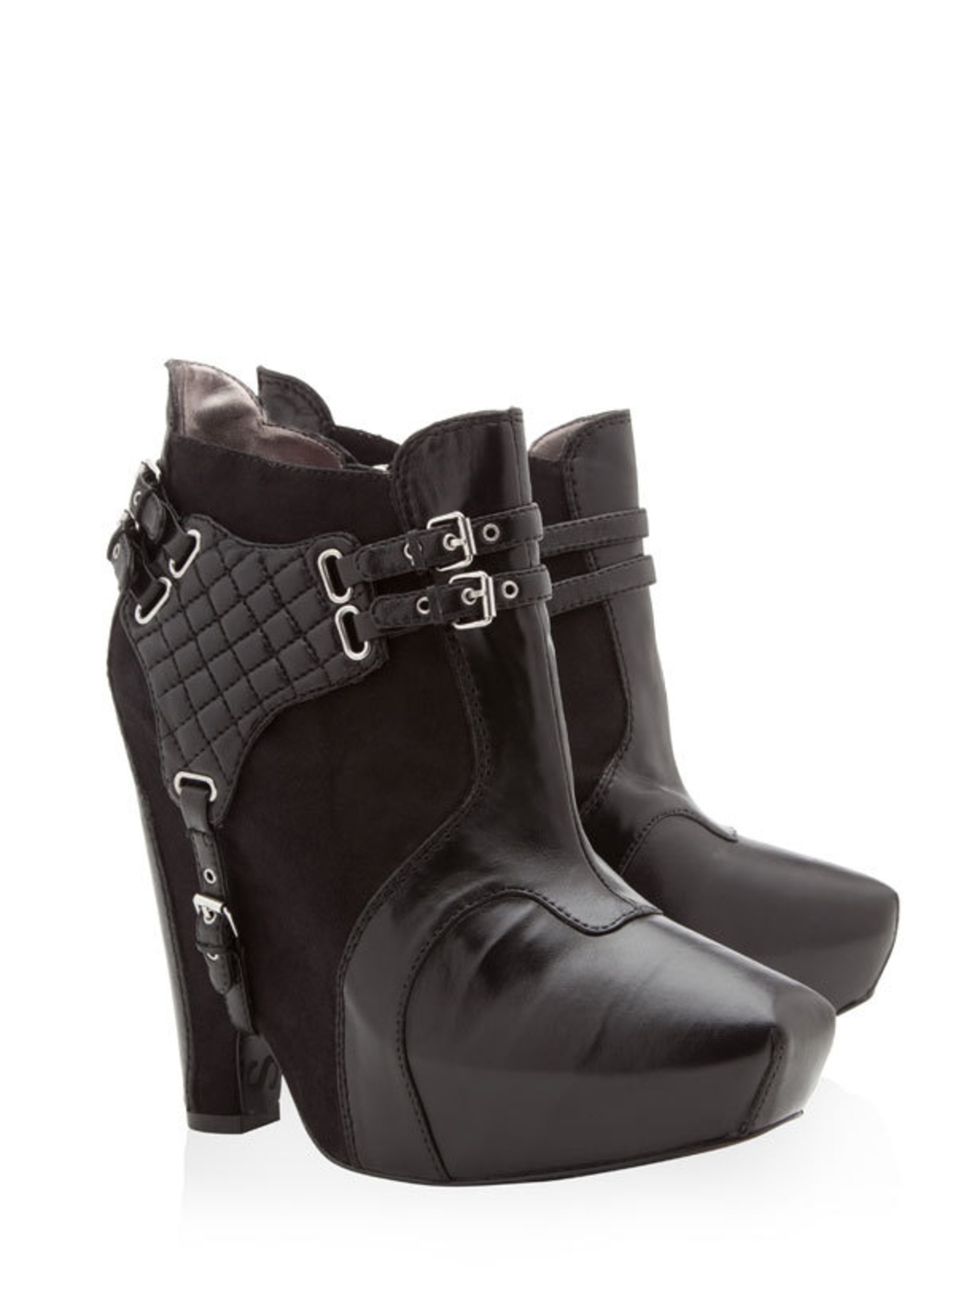 <p> </p><p>Give the new season trends a rock chick kick with these statement wedge boots Sam Edelman buckle wedge boots, £176, at <a href="http://www.harveynichols.com/womens/categories/designer-shoes/boots/s324476-zoe-buckle-platform-boots.html?colour=B